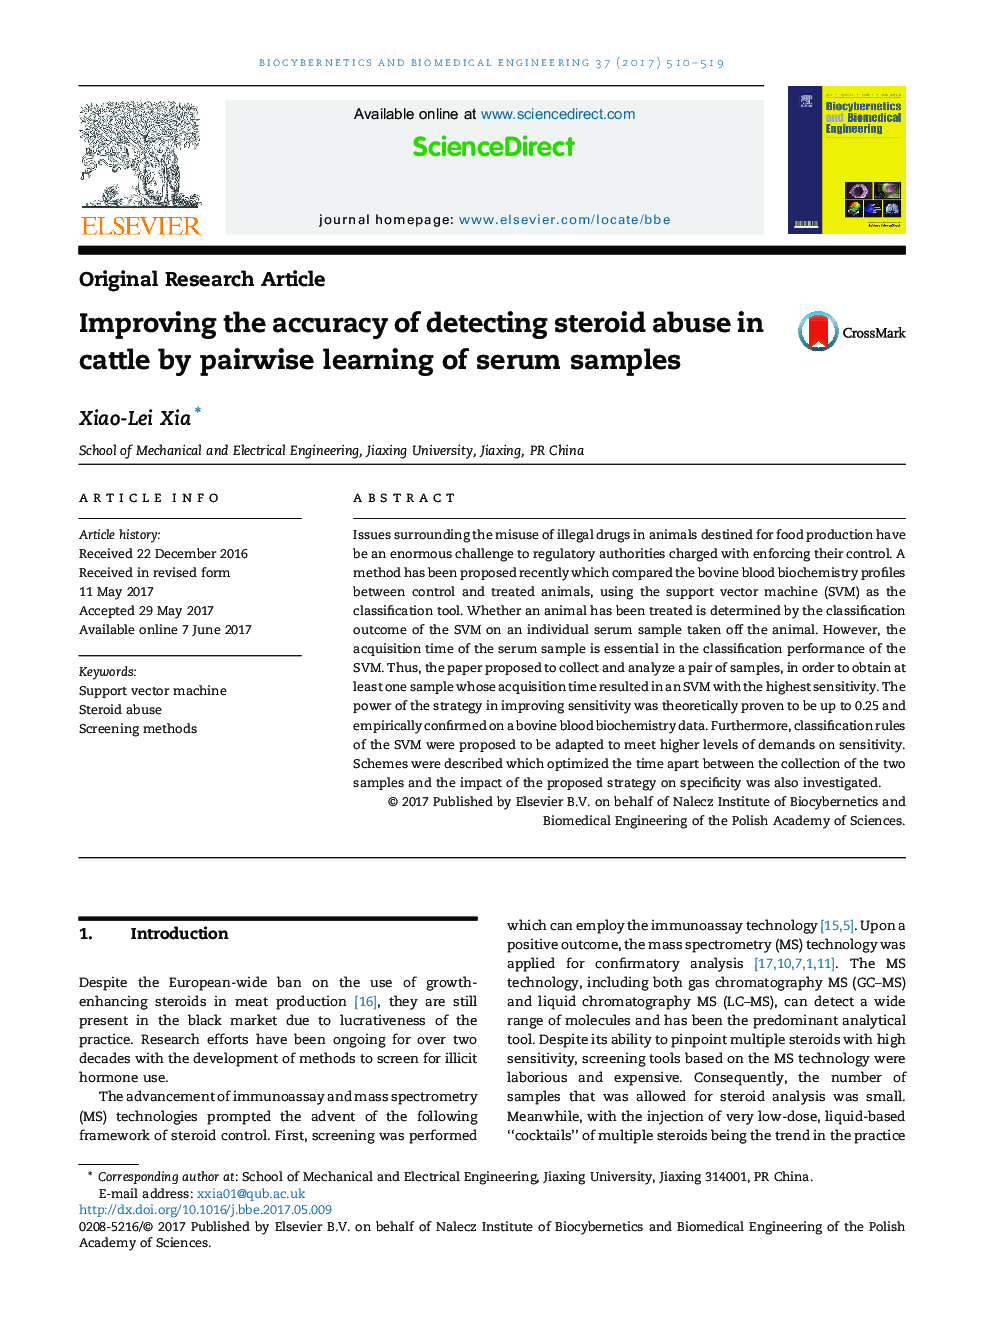 Improving the accuracy of detecting steroid abuse in cattle by pairwise learning of serum samples